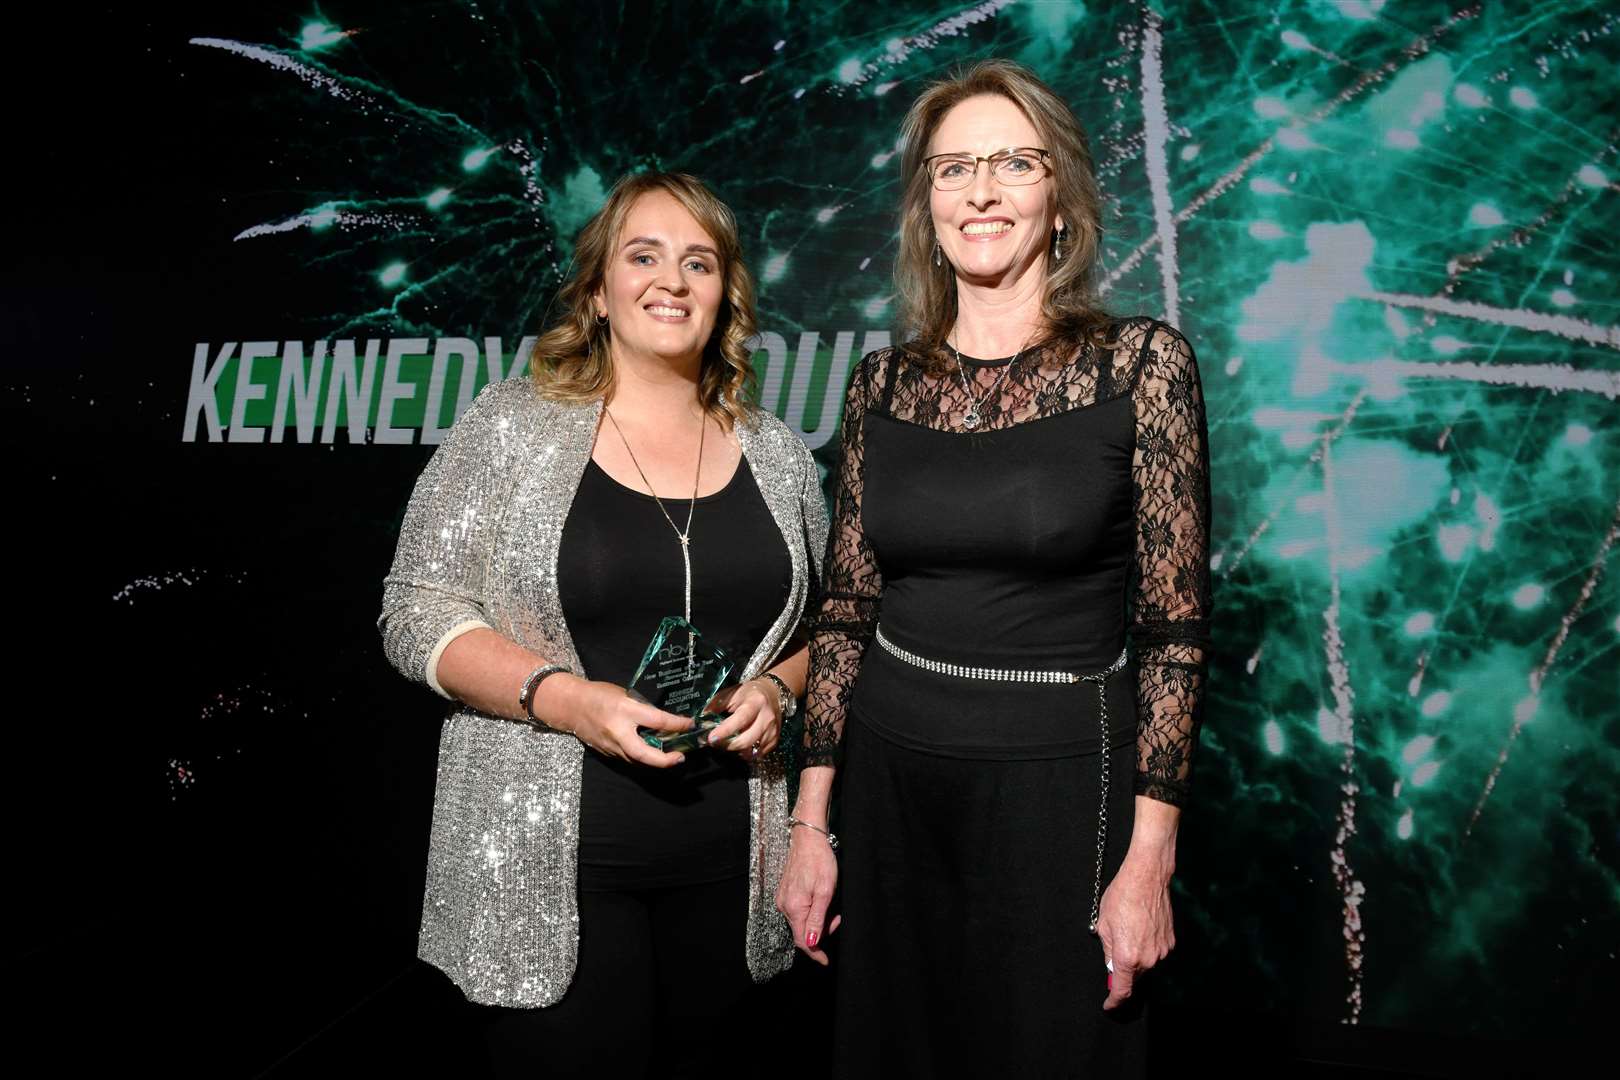 Karen Kennedy receiving the award for new business of the year at the 2022 ceremony. Picture: James Mackenzie